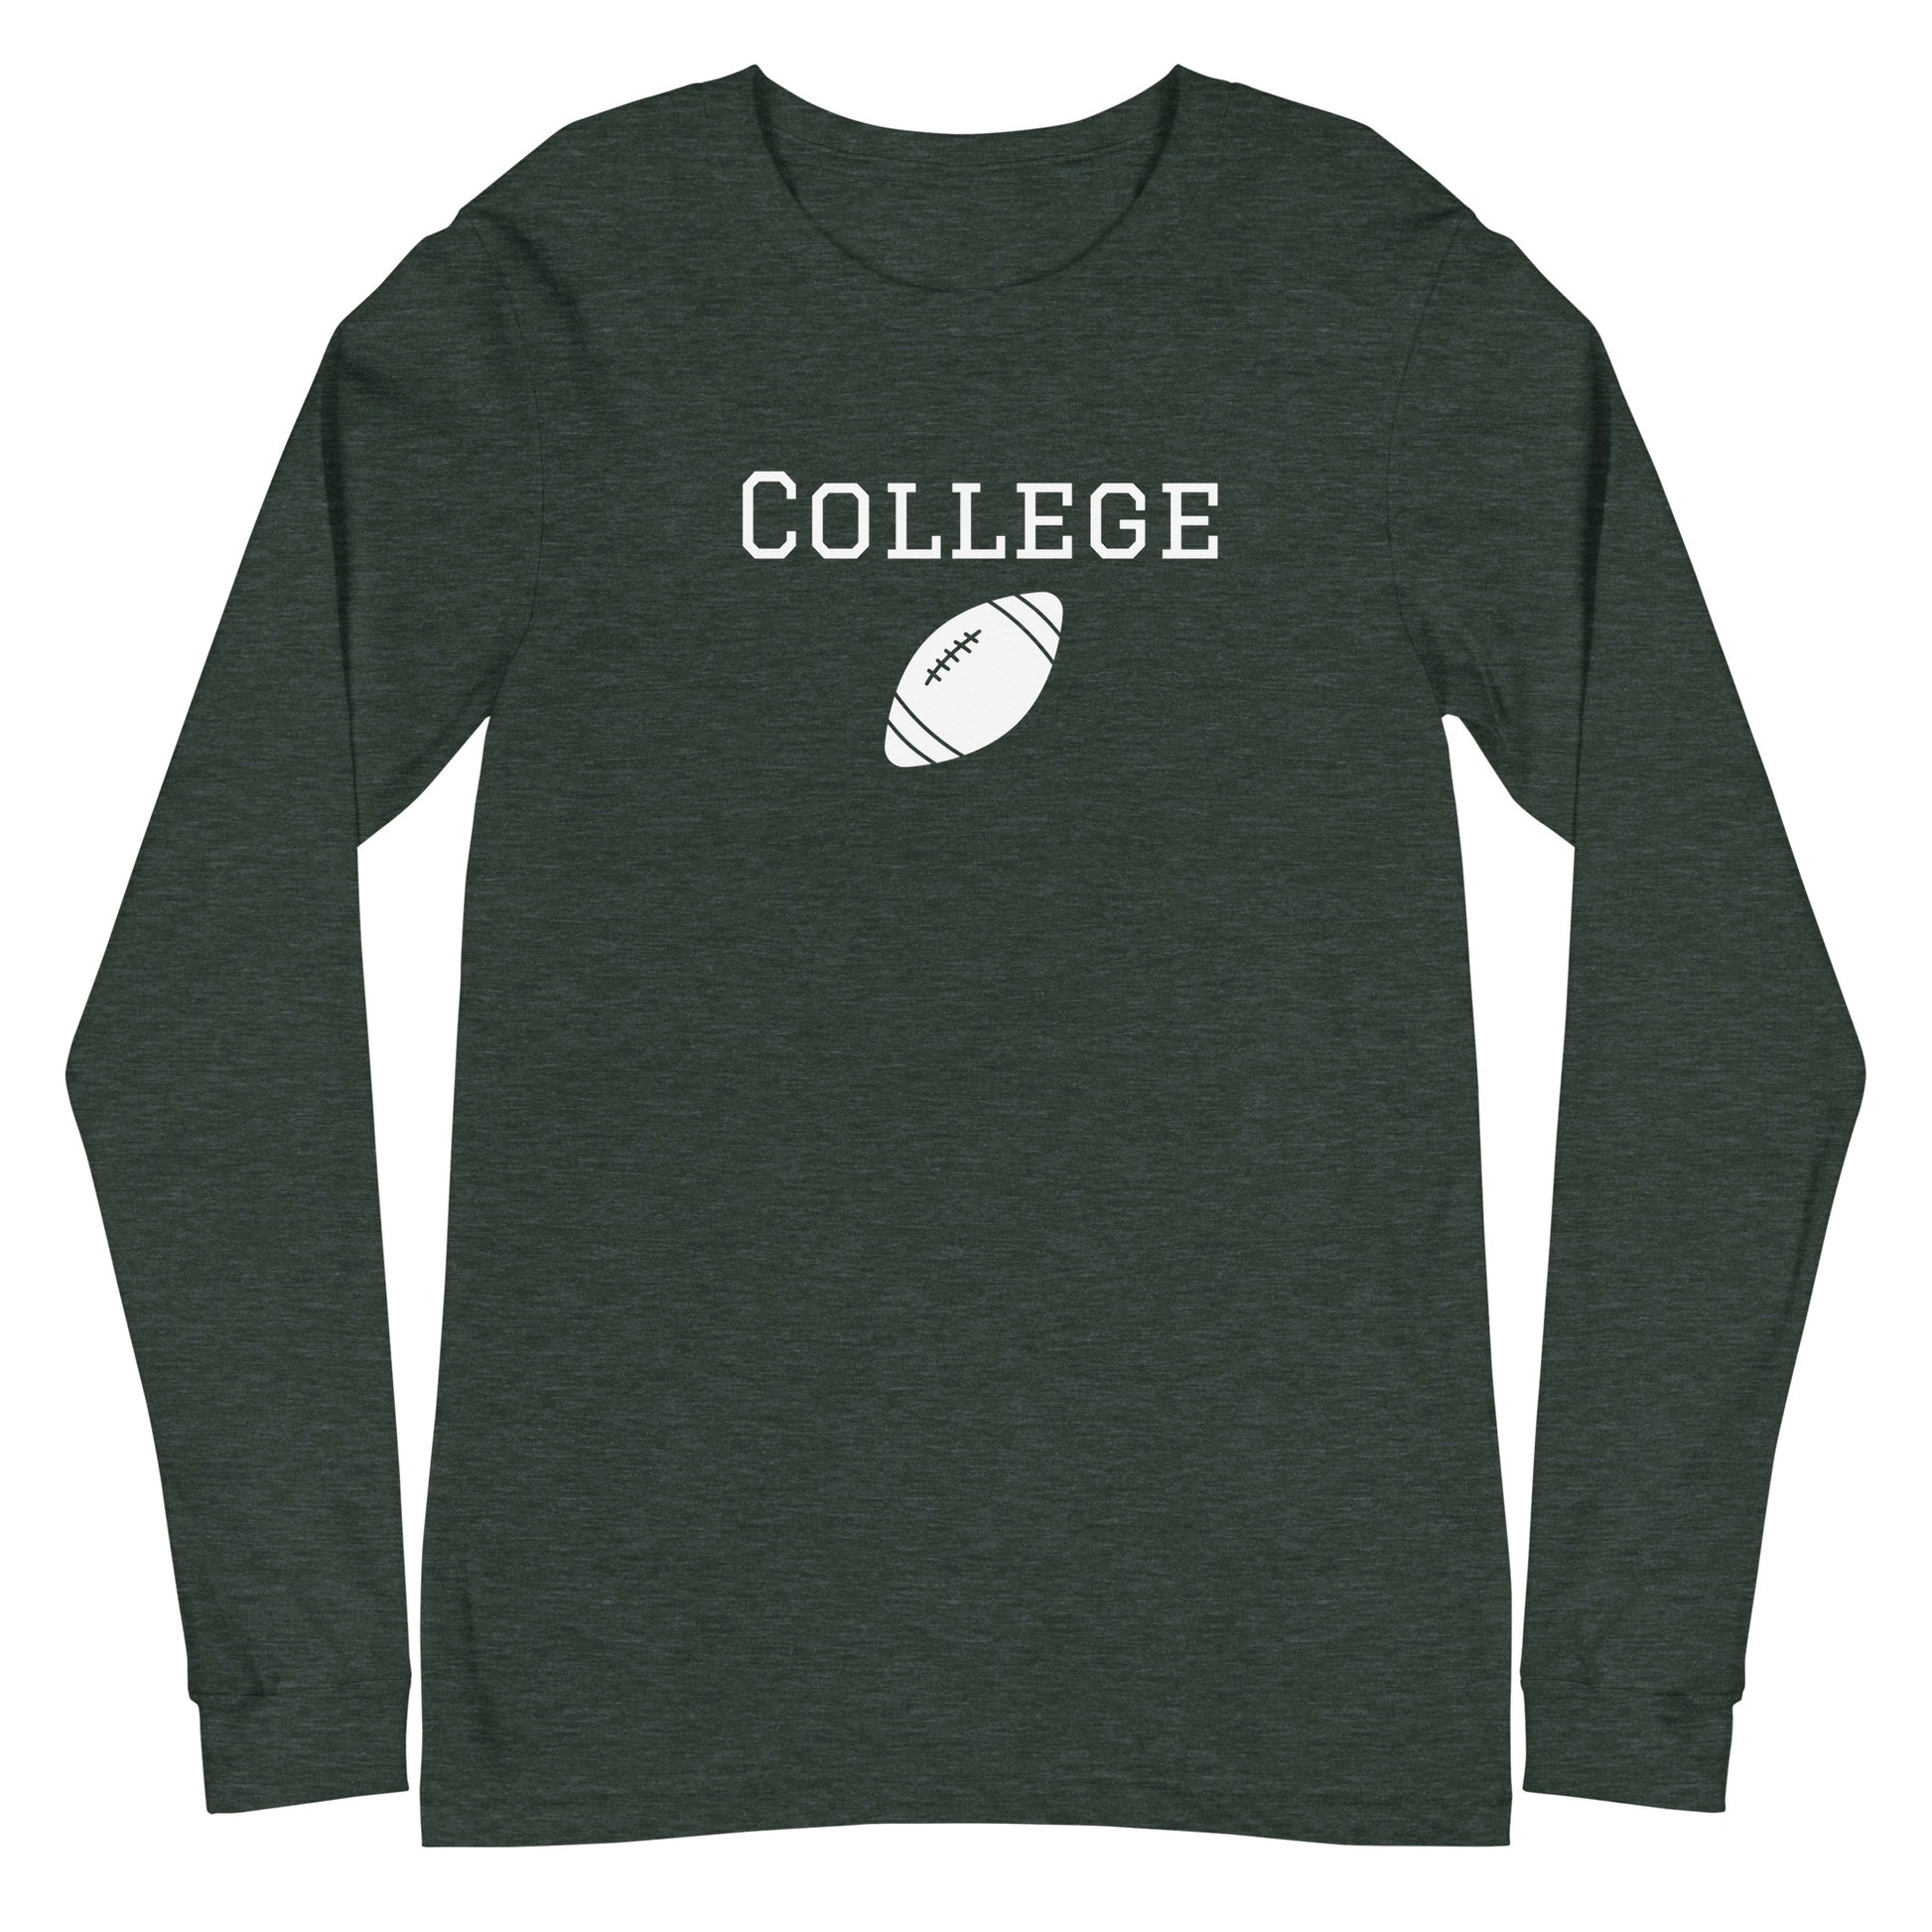 Forest green long sleeve tee shirt that says 'college' and has a football graphic